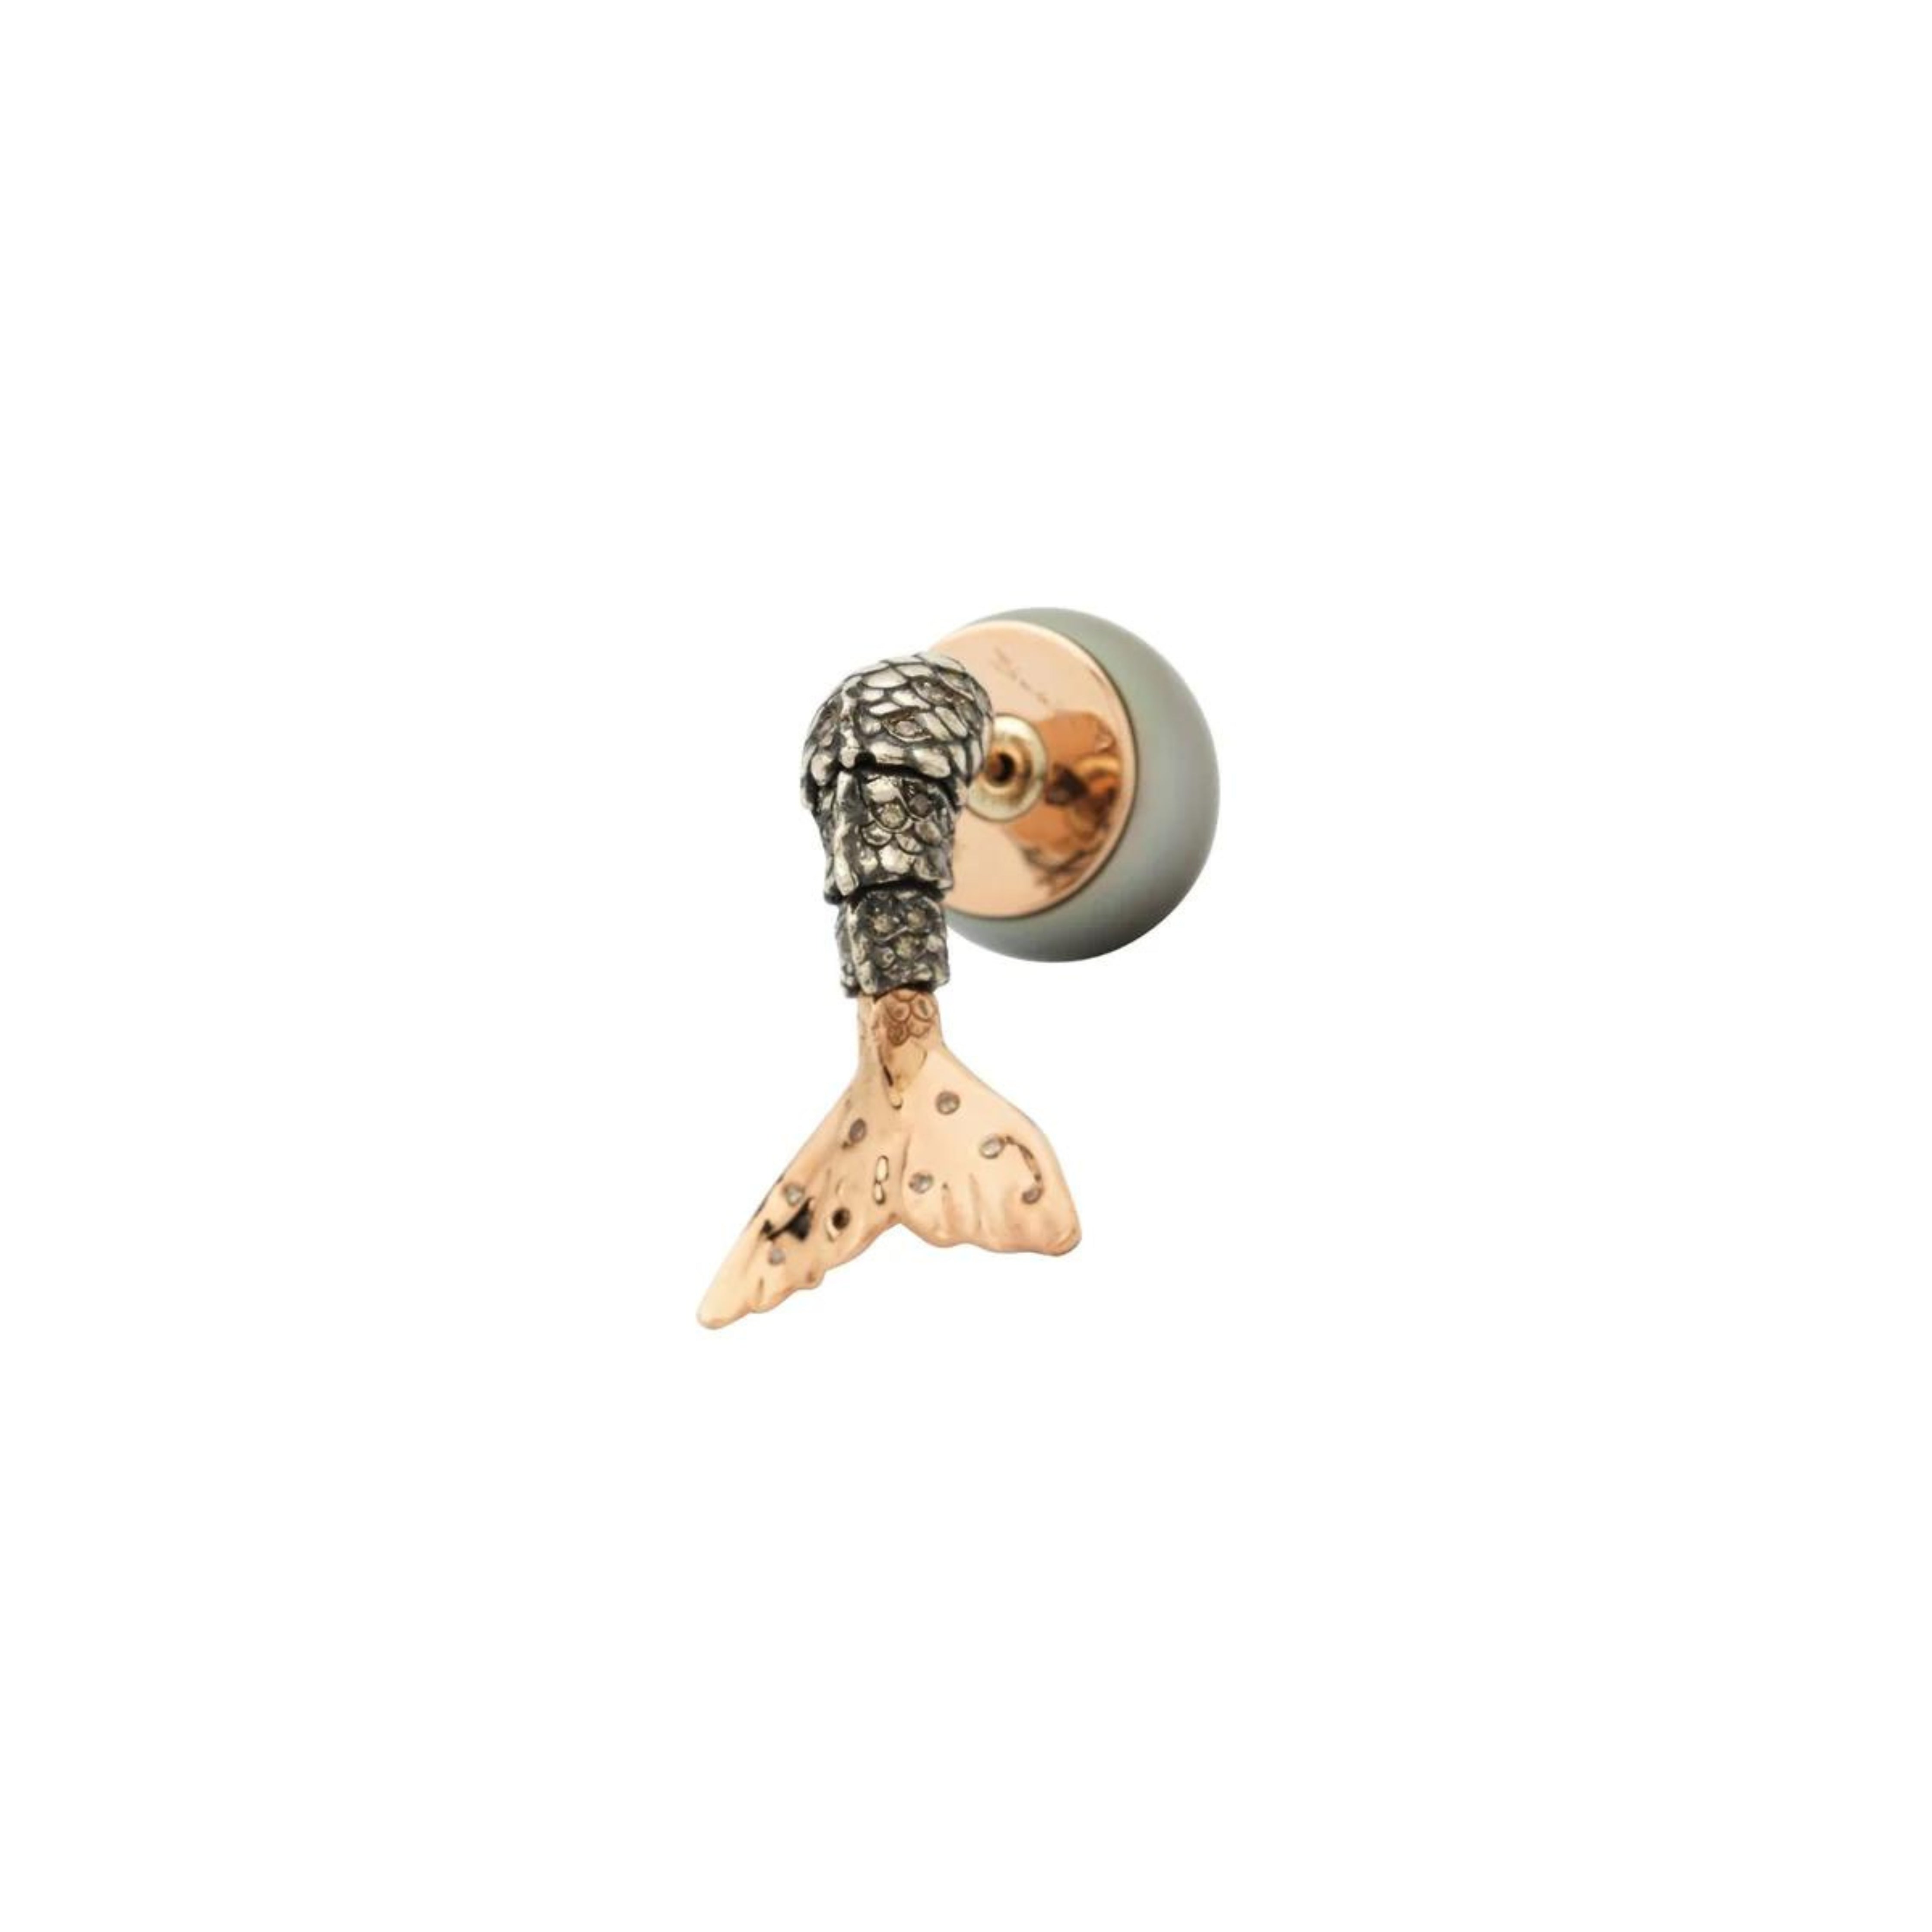 Bibi van der Velden Mermaid Pearl Earring. Made in 18K rose gold and sterling silver with a deep blue pearl and brown diamonds. Featuring a moving mermaid's tail with moving scales and gold fin. Shown from the back.